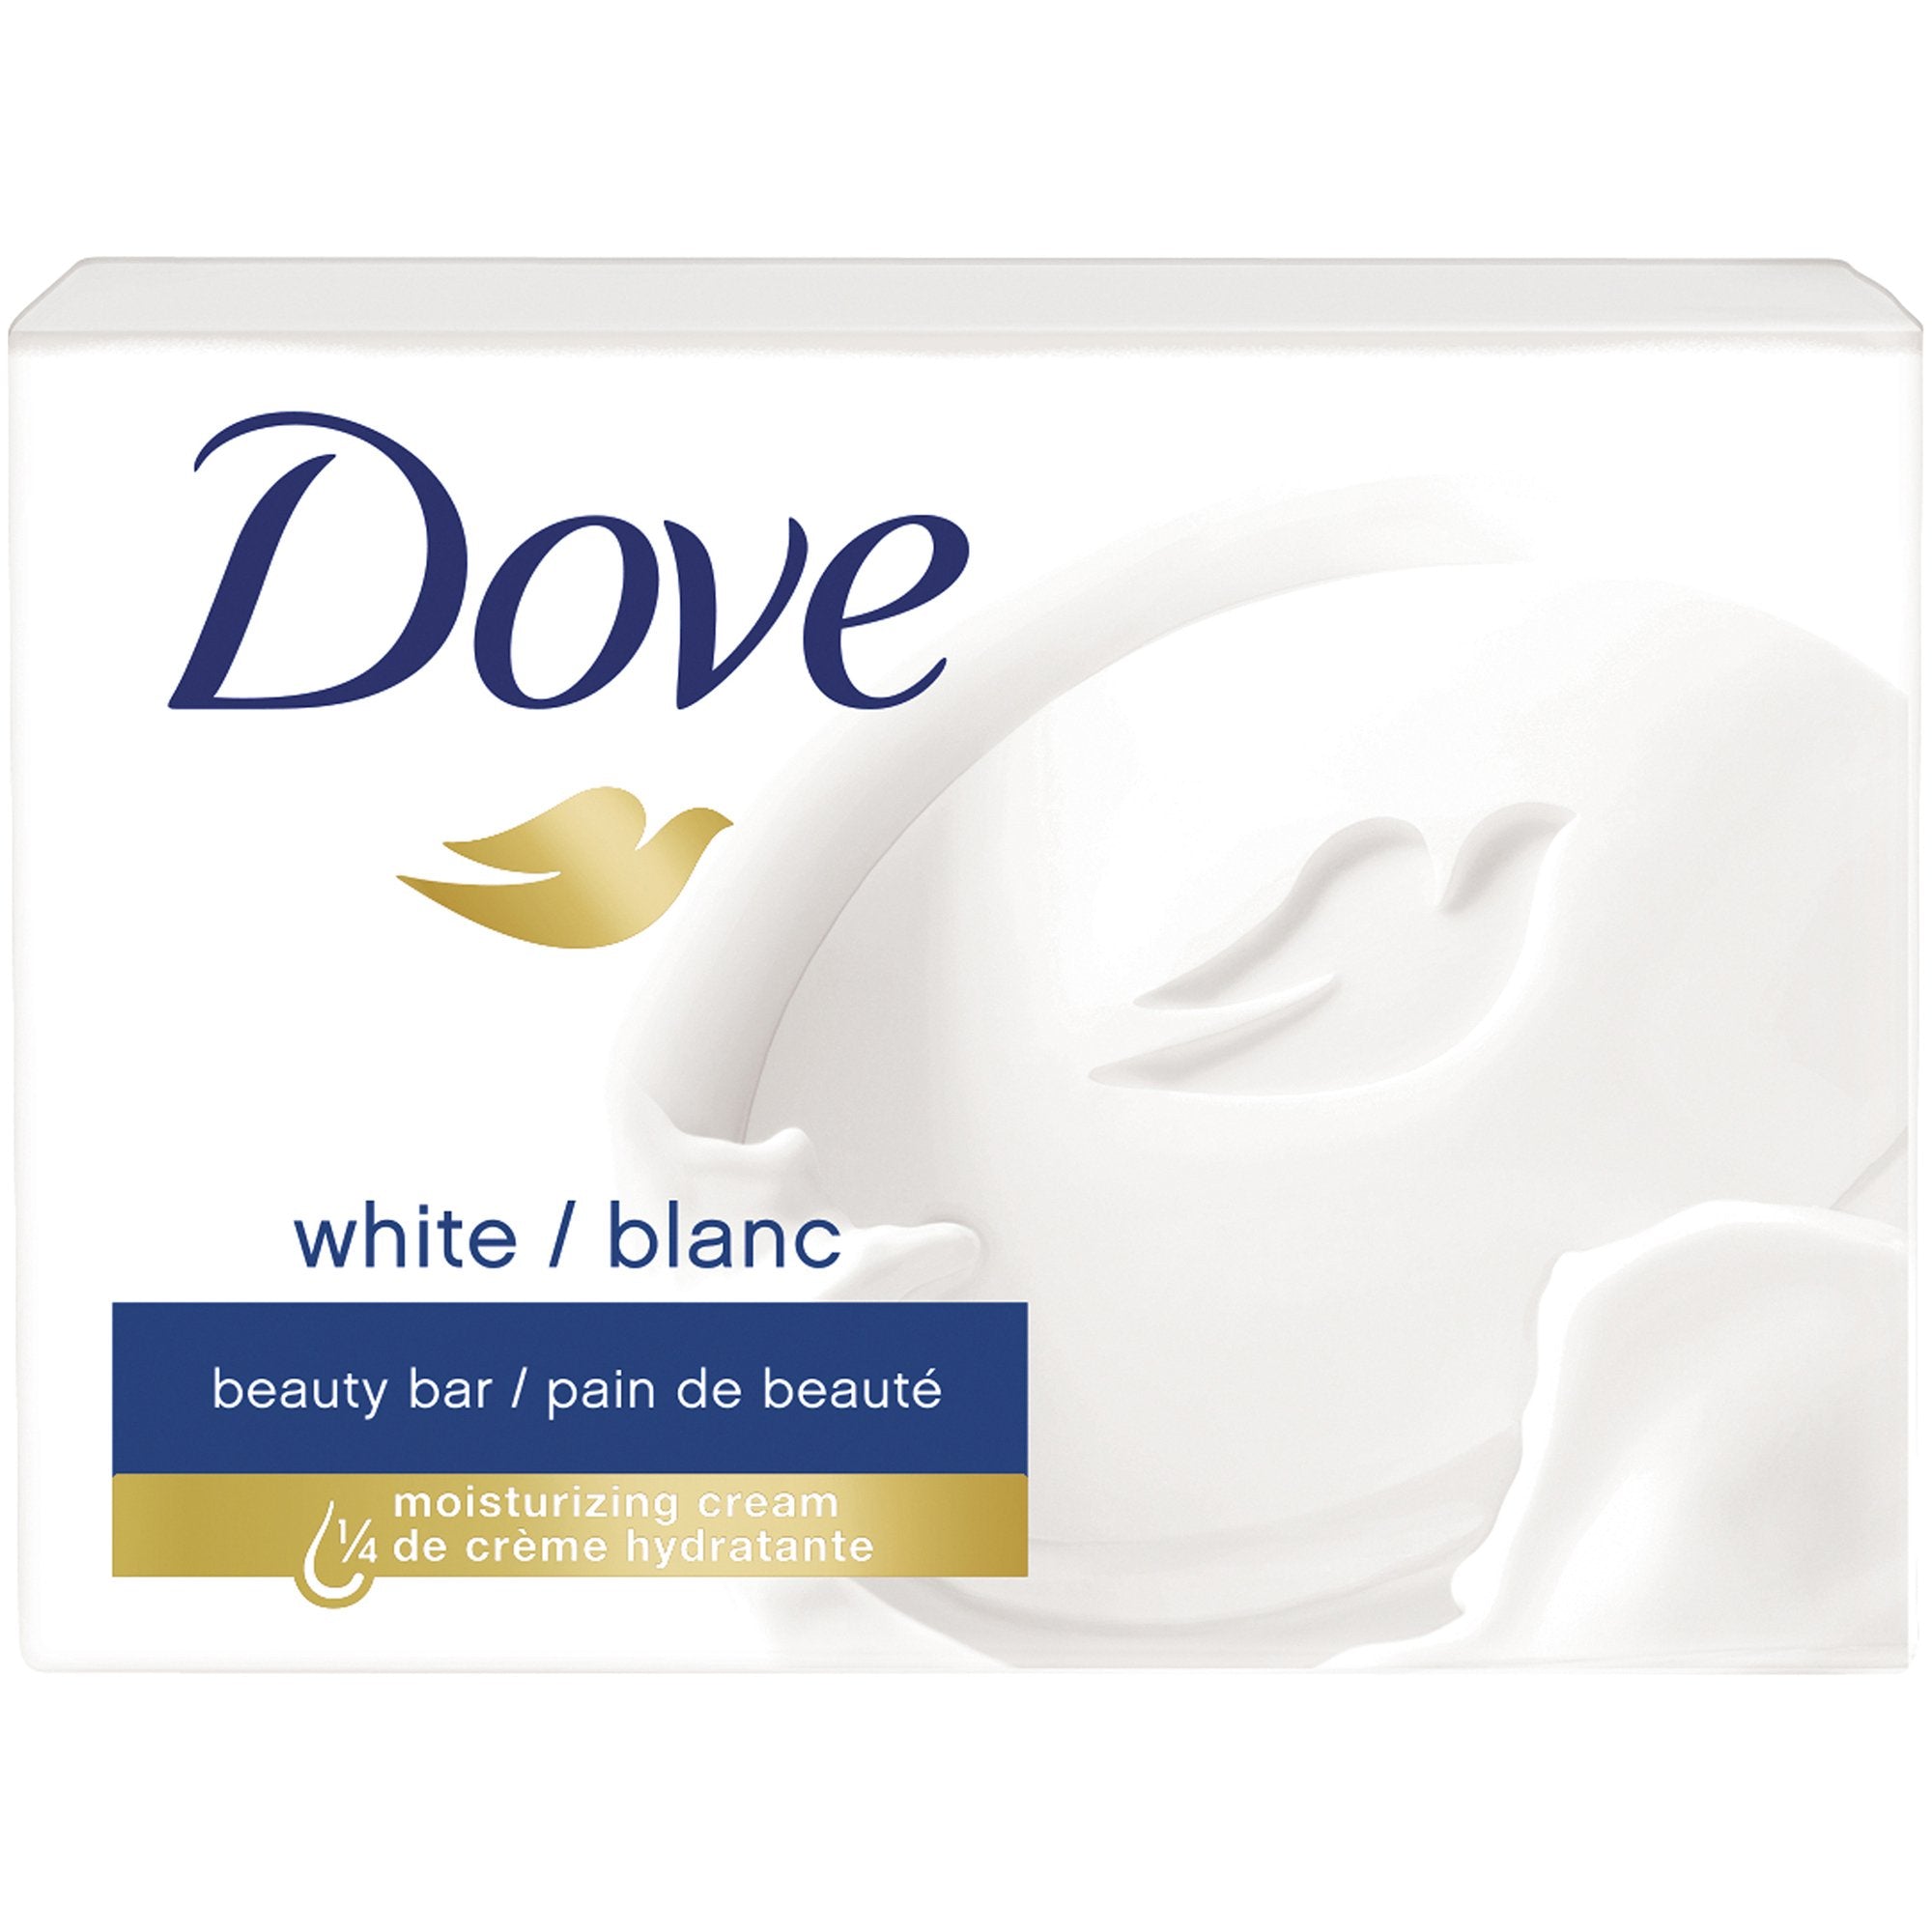 Soap Dove® Bar 3.15 oz. Individually Wrapped Scented